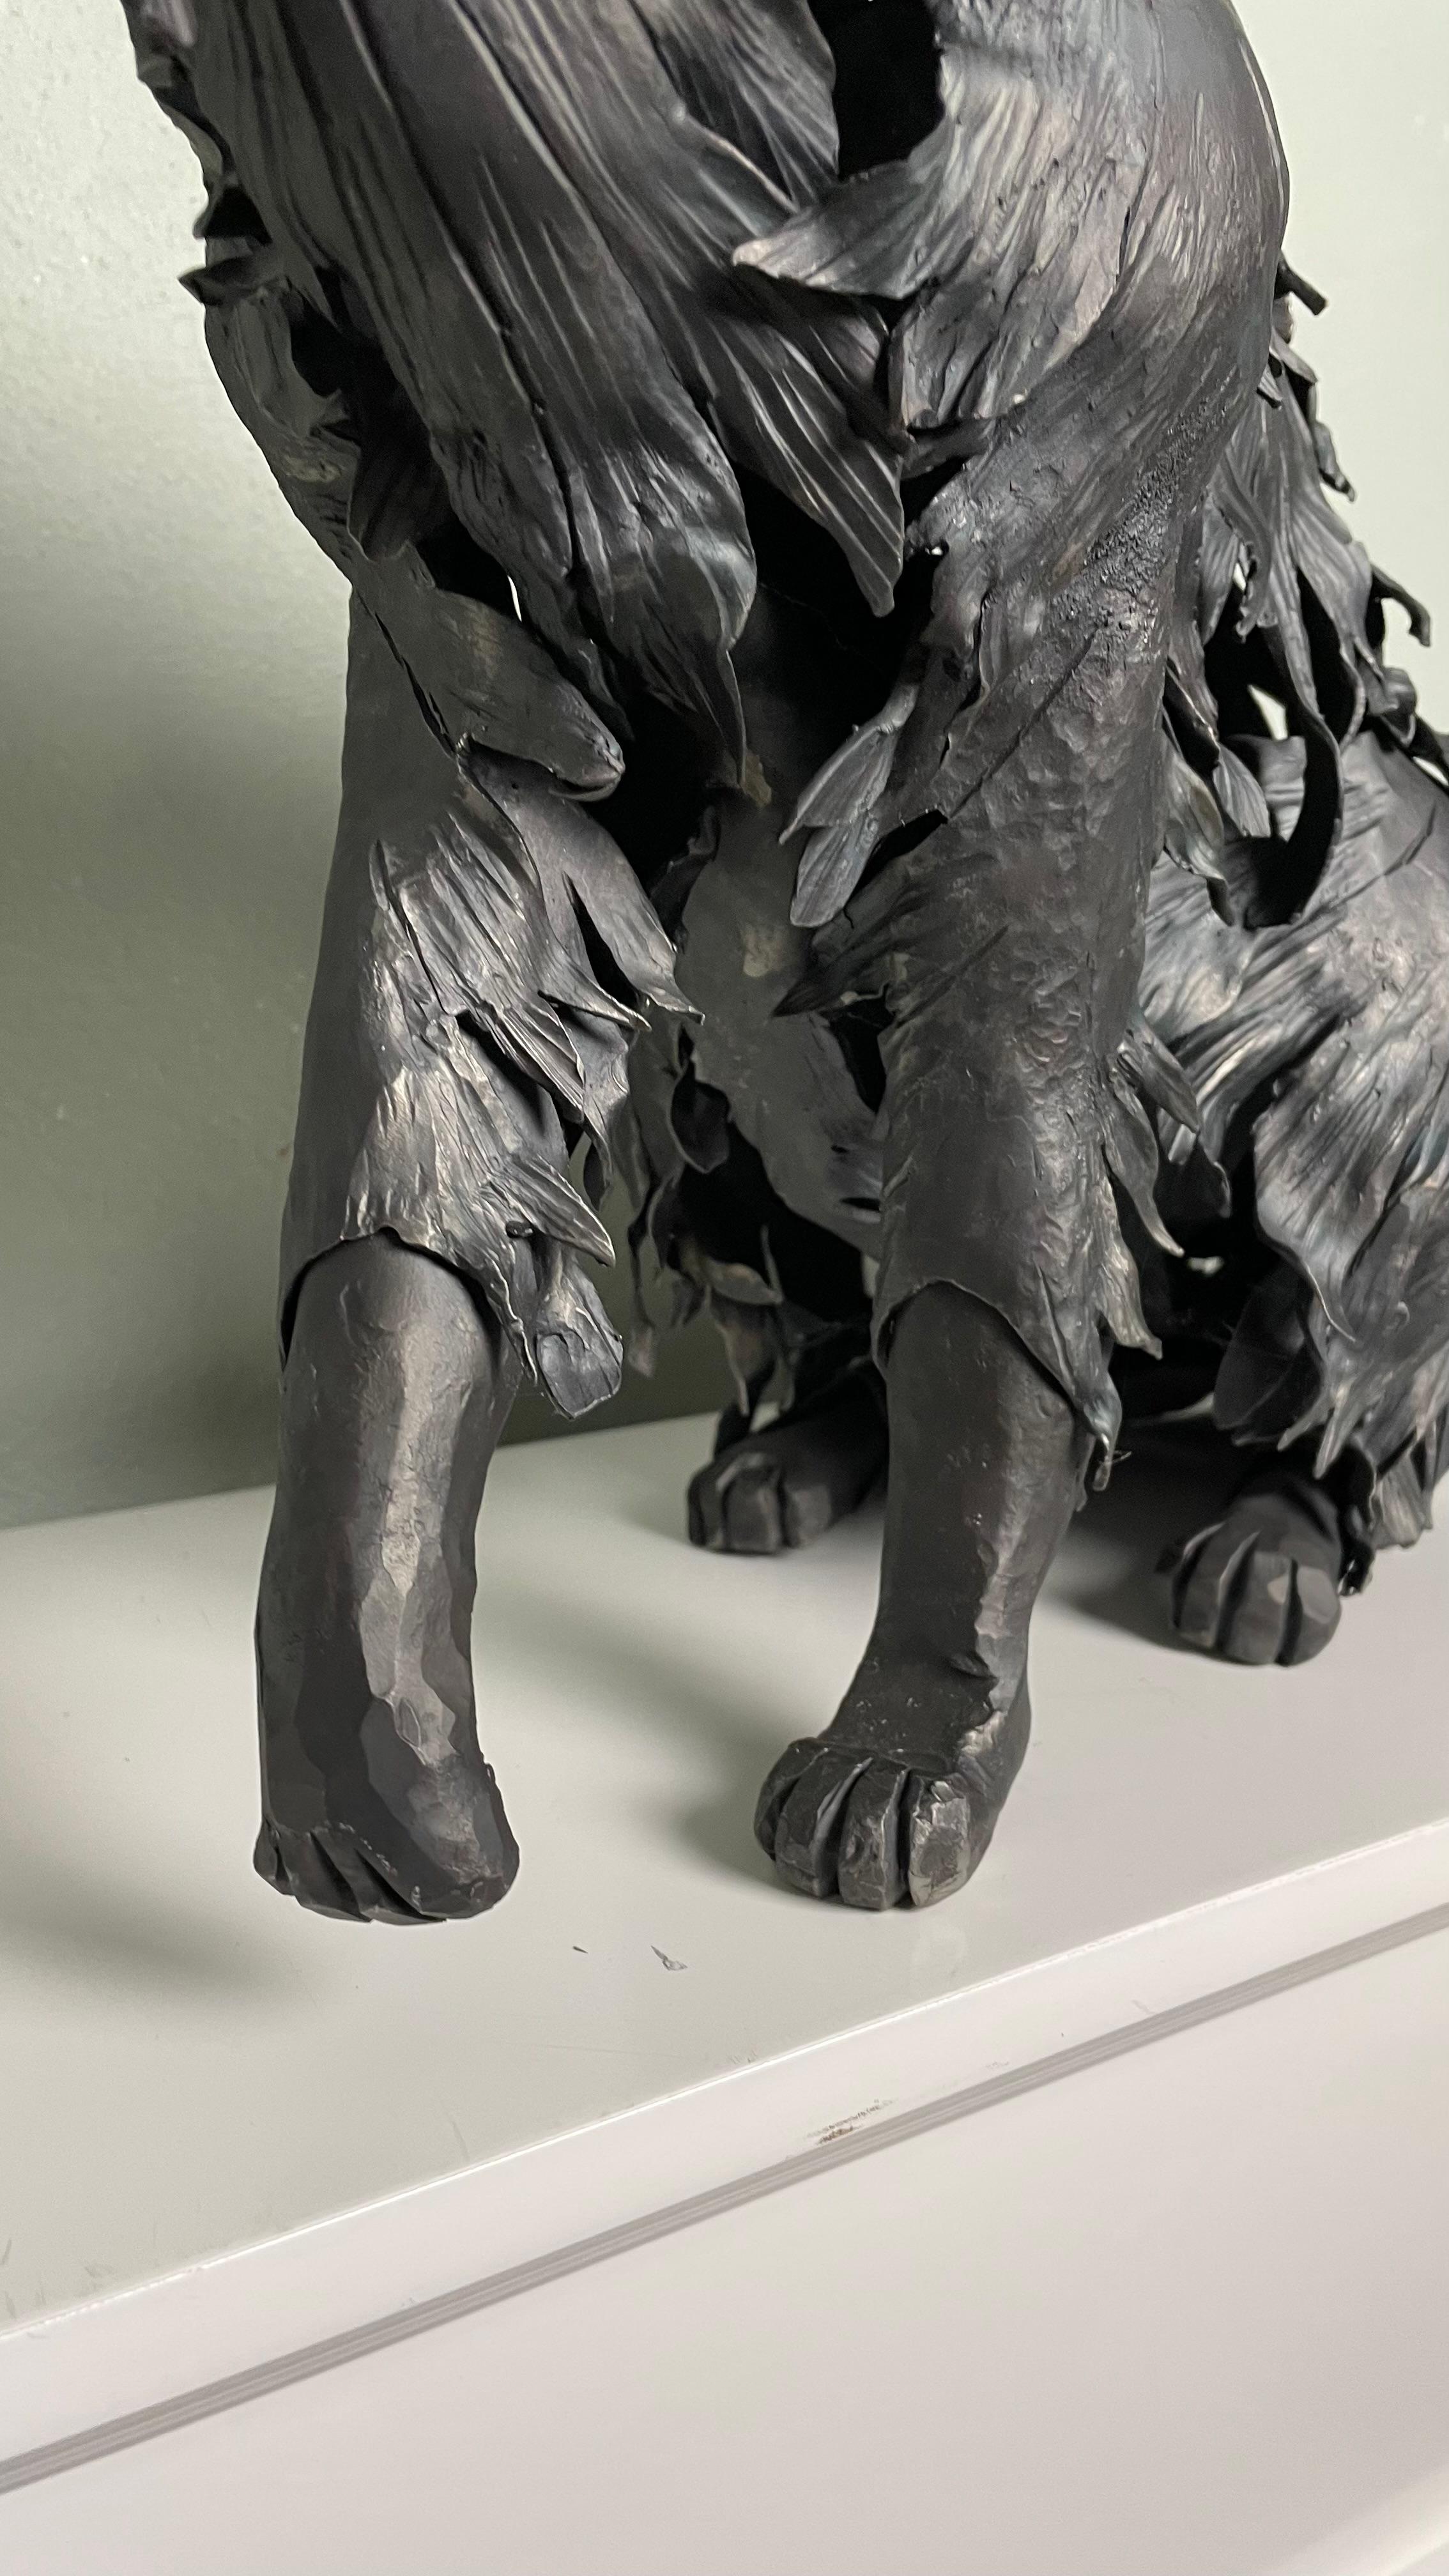 An exquisite and highly tasteful sculpture, The Cat is one of the most recent artworks by the Italian master blacksmith Ivan Zanoni who has recently been put on display at MART, Museum of Modern Art in Rovereto (the most prominent in Italy), which